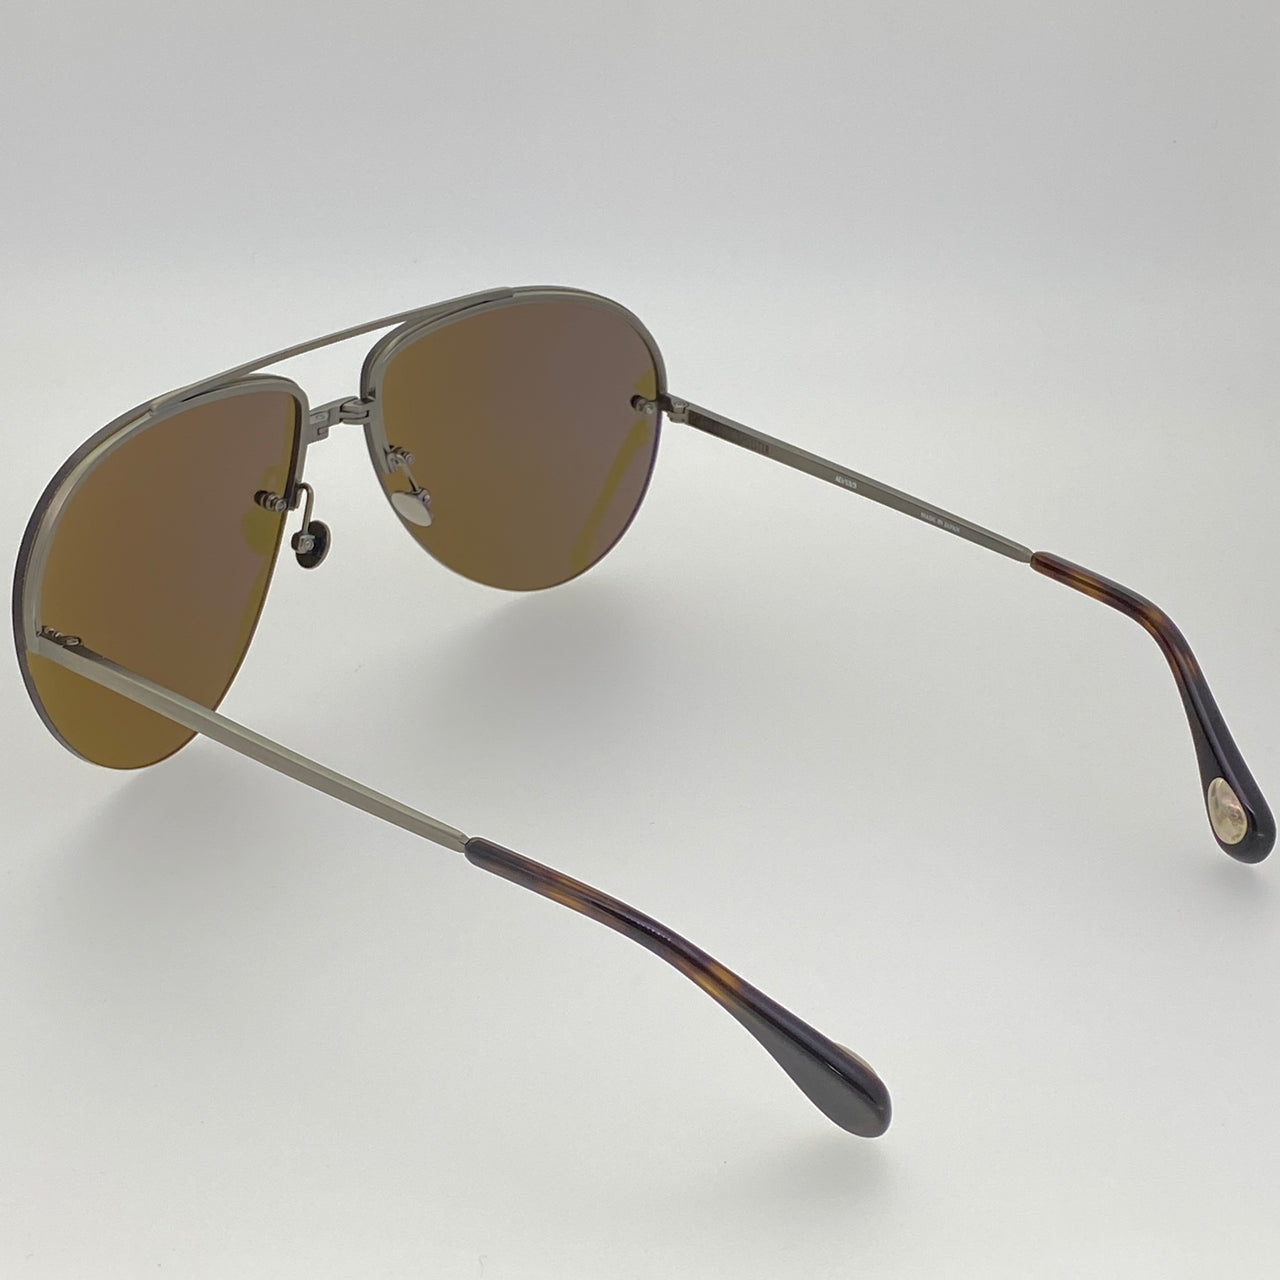 Ann Demeulemeester Men's Sunglasses White Gold and Brown AD13C3SUN